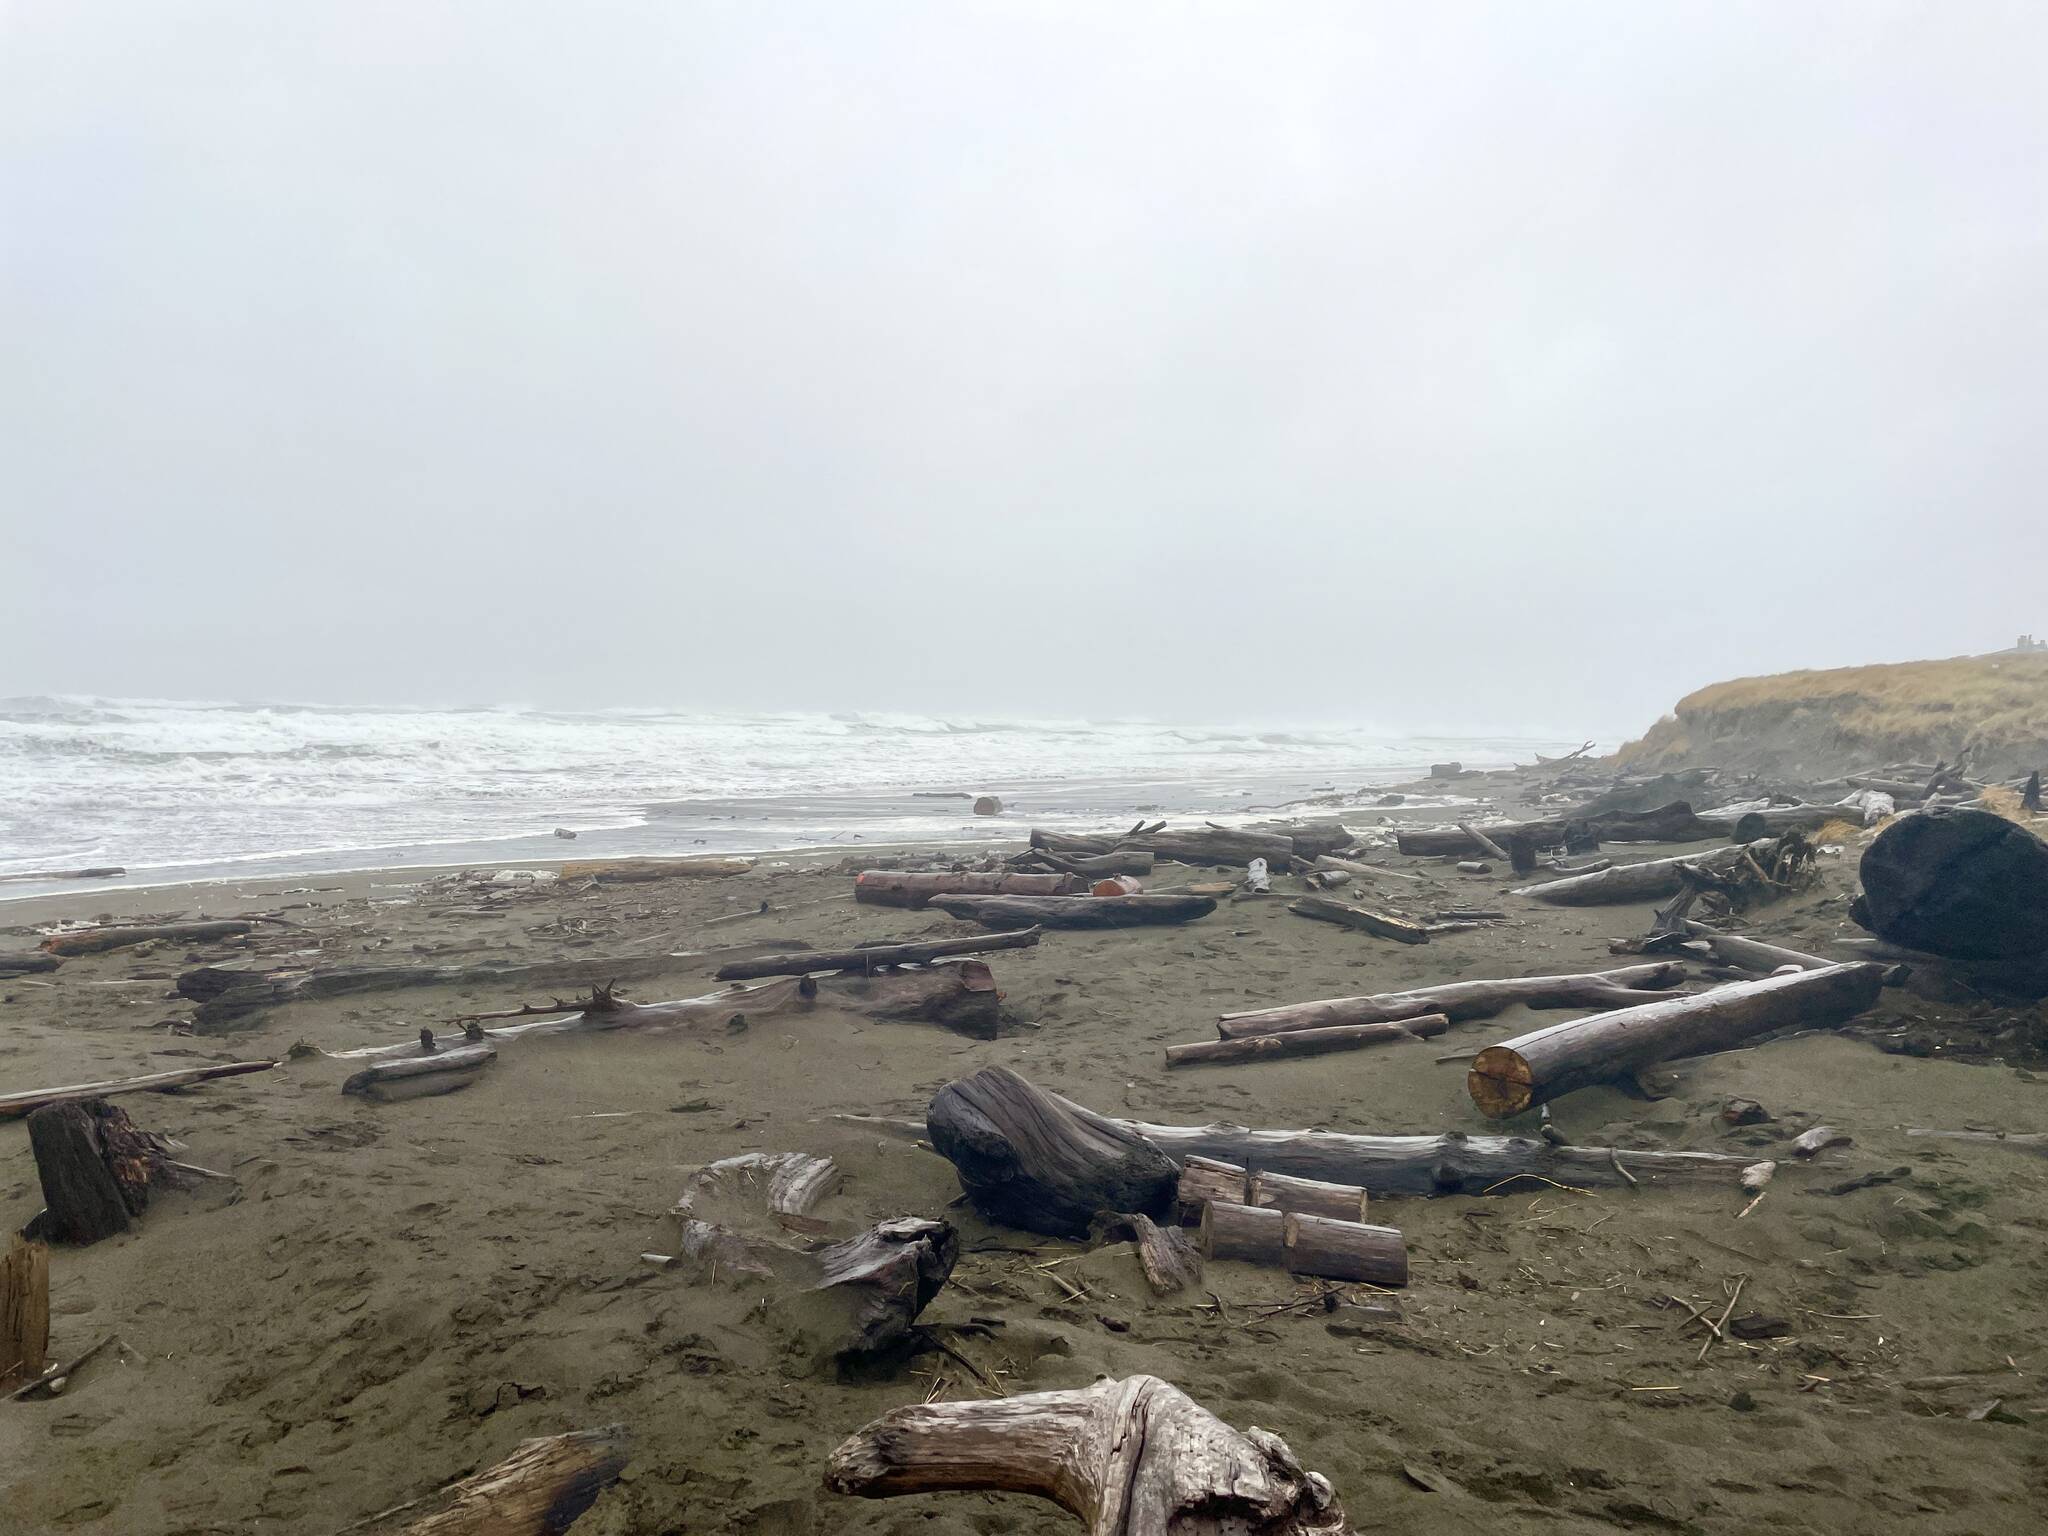 Flotsam litters the beach in Ocean Shores during a winter storm on Dec. 27. (Michael S. Lockett / The Daily World)